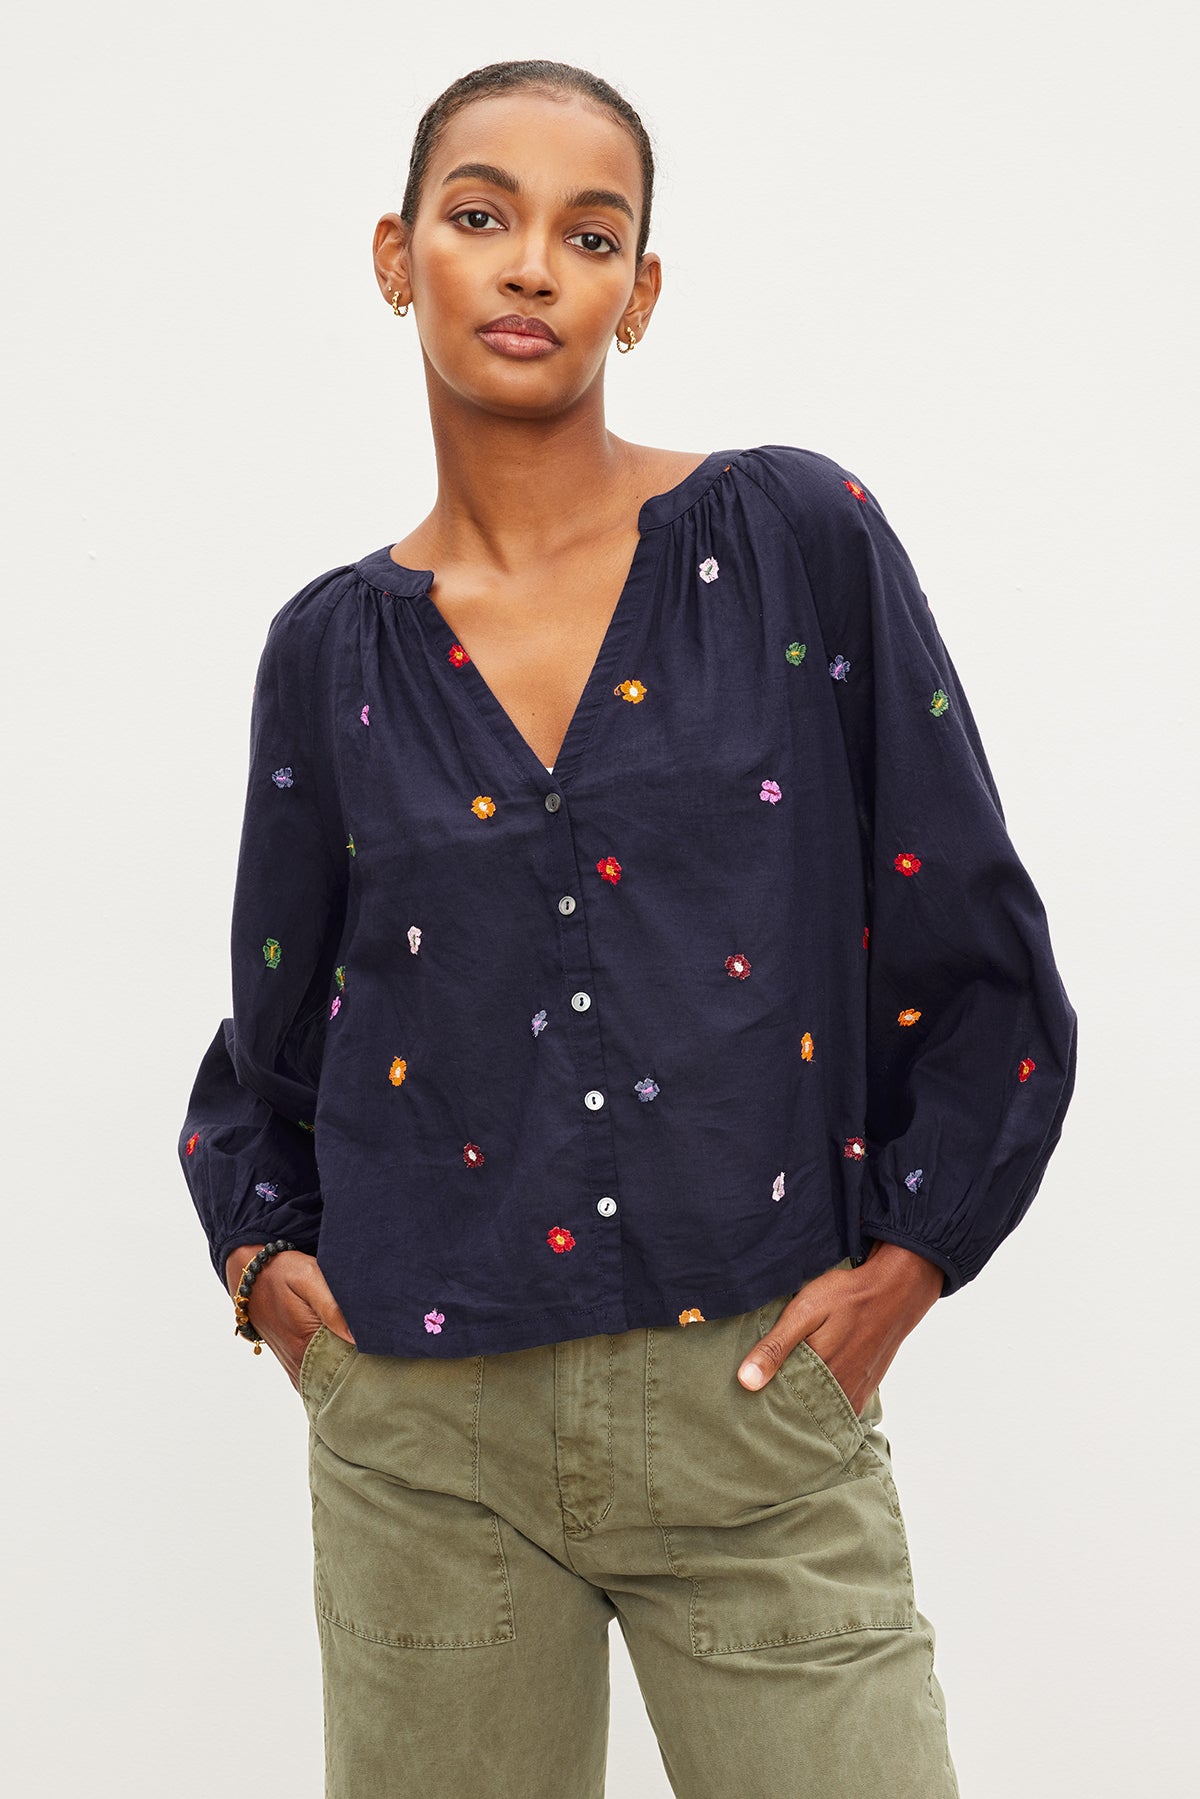   The model is wearing a Velvet by Graham & Spencer ARETHA EMBROIDERED BOHO TOP with multi - colored embroidered dots. 